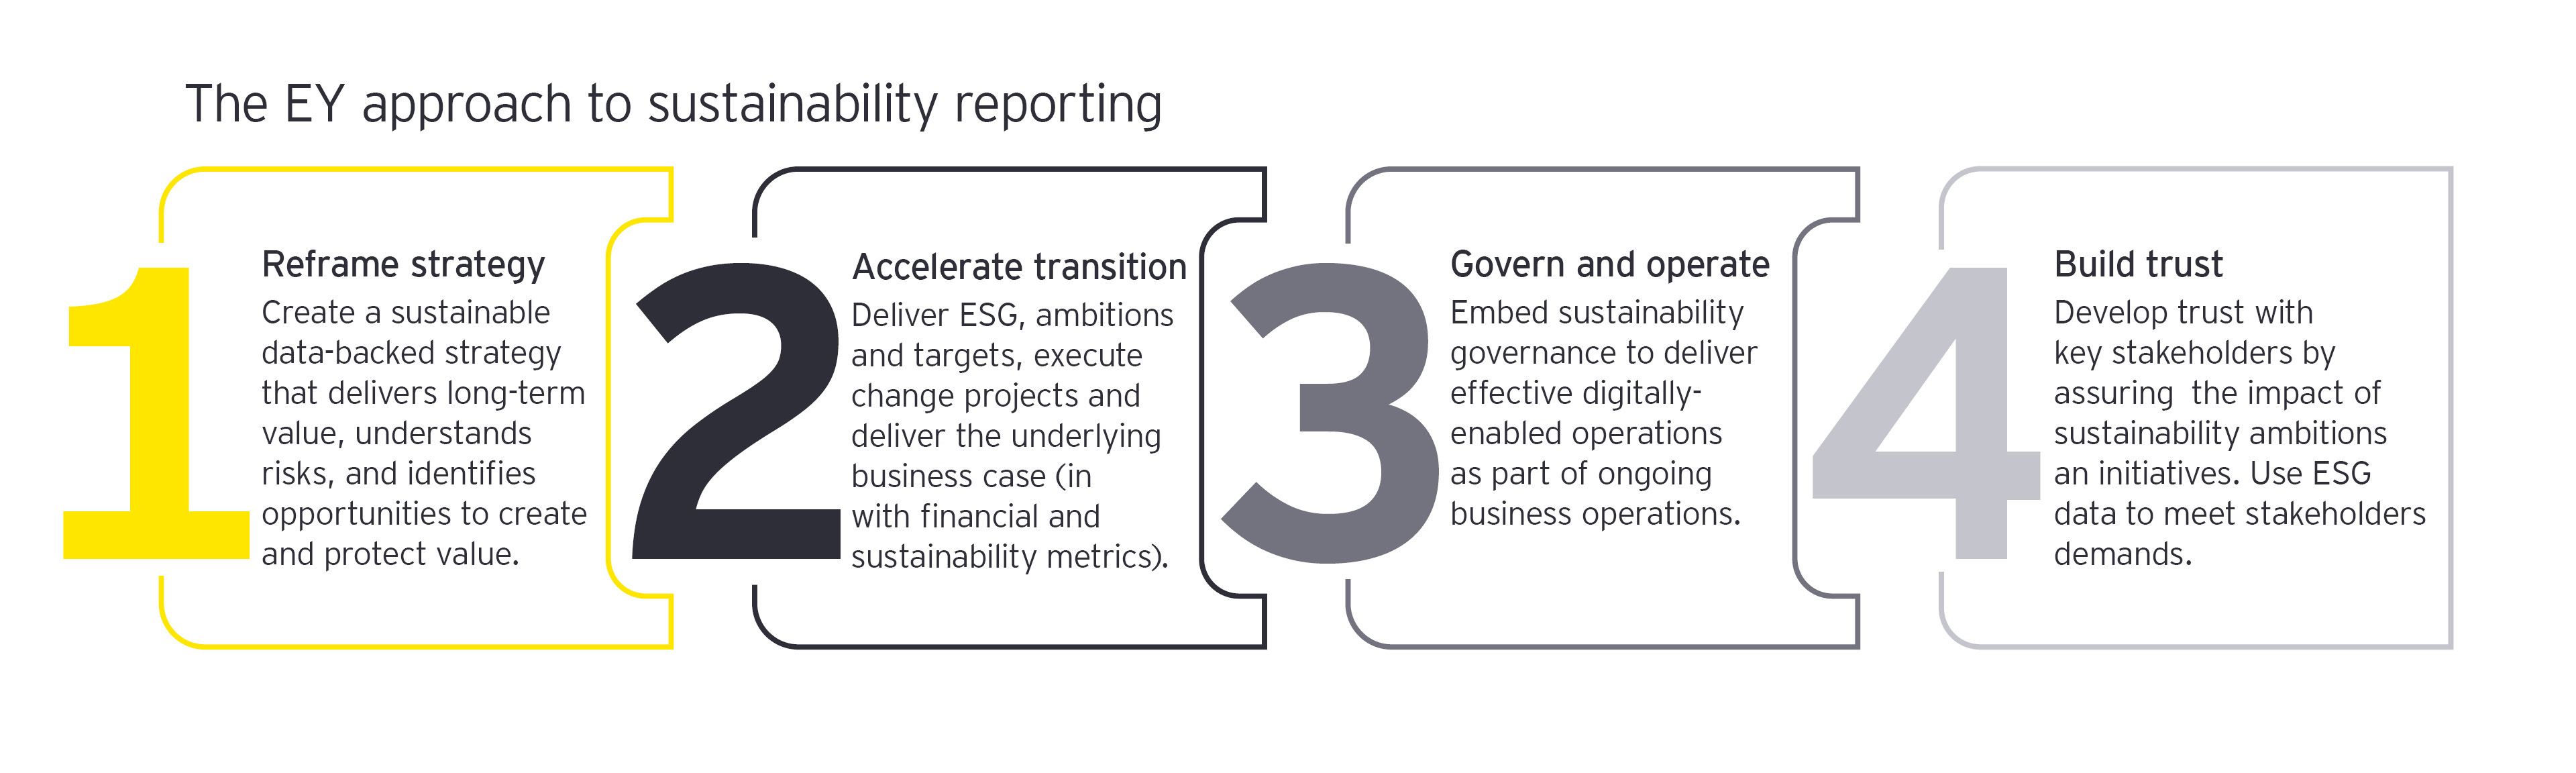 Picture of The EY approach to sustainability reporting